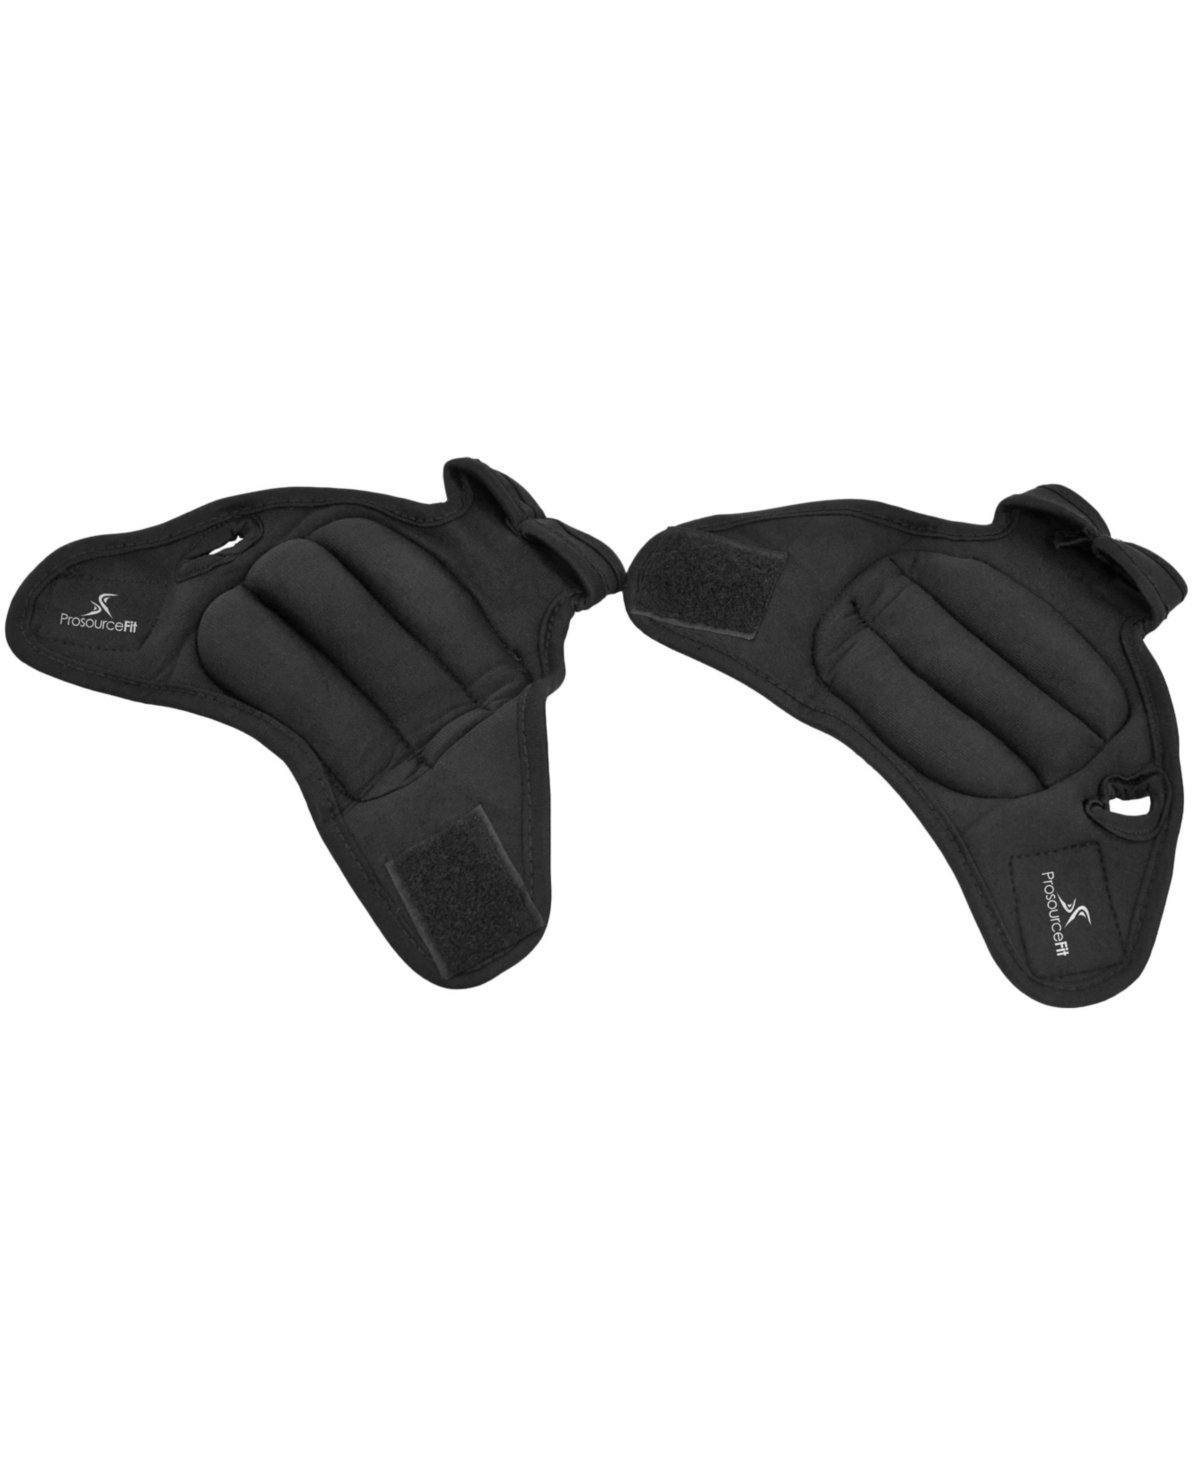 Weighted Sculpting Gloves - Black